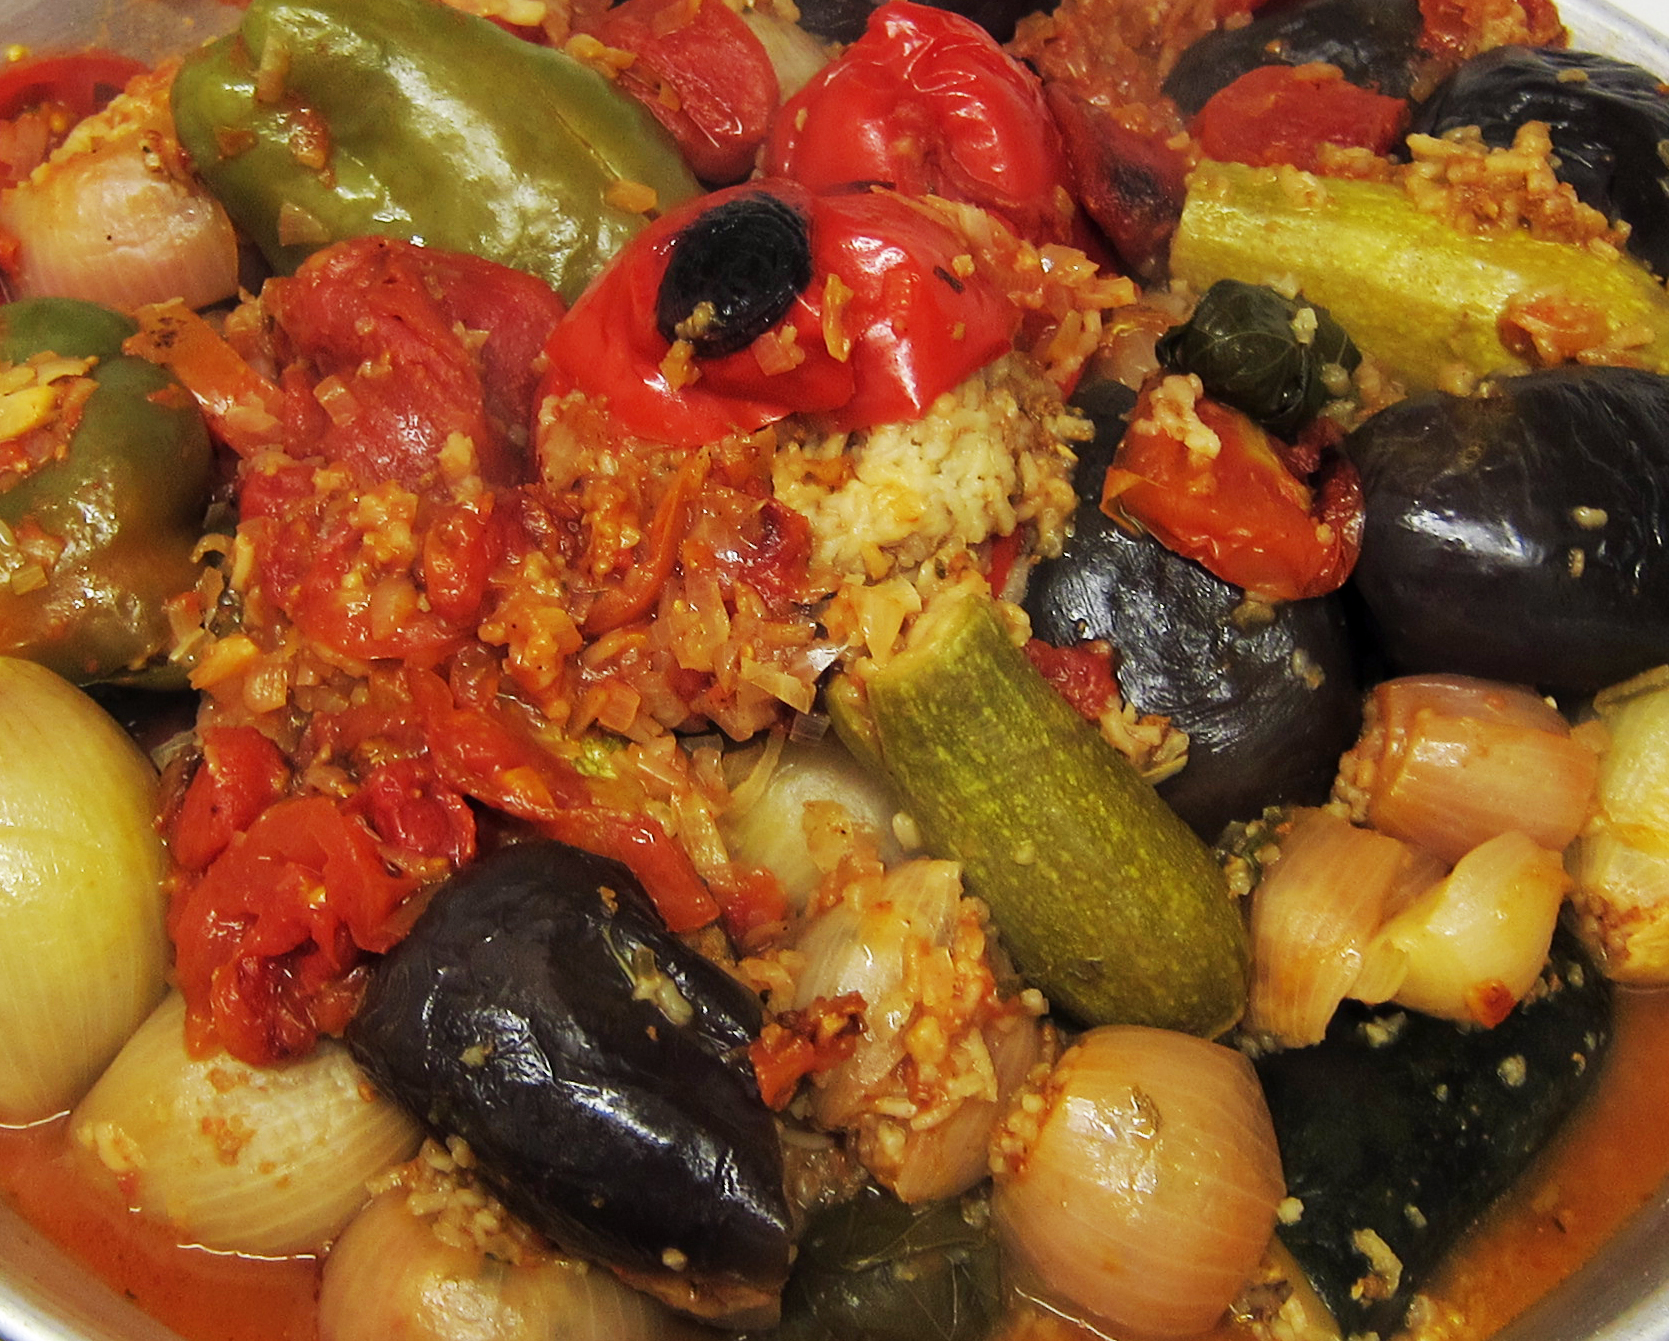 A closeup image of a traditional middle eastern dish.